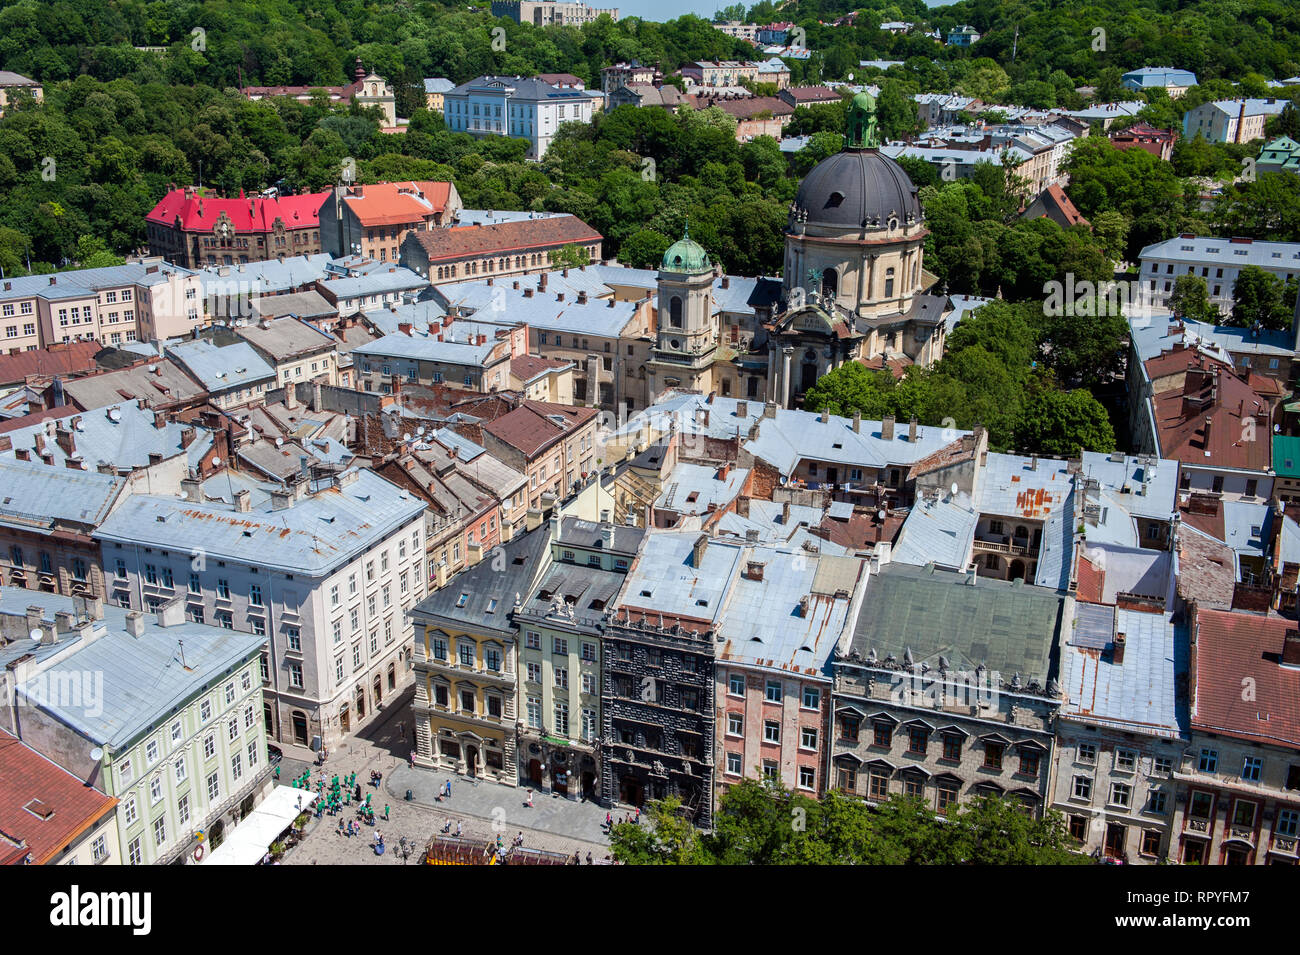 The view over the Old Town from the clock tower on Market Square in Central Lviv, Ukraine. Stock Photo